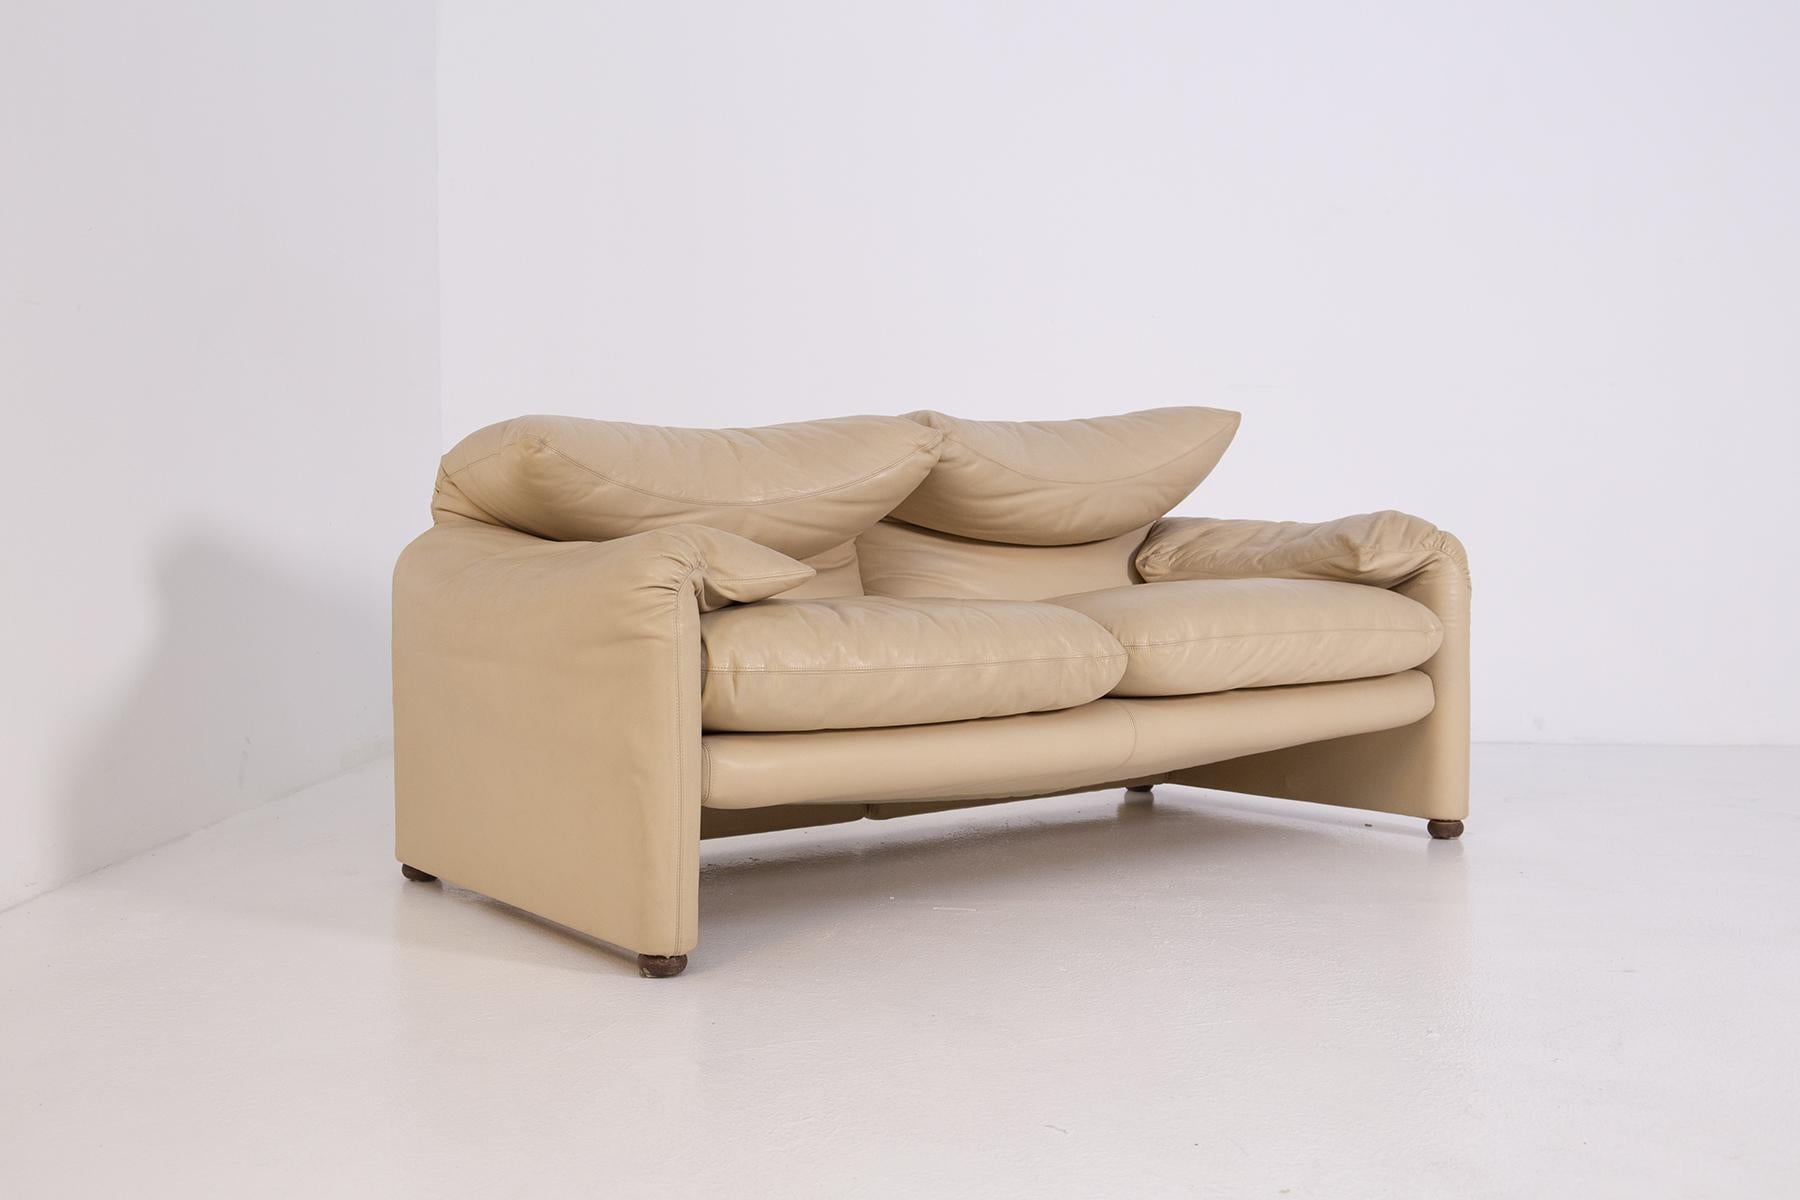 Sofa designed by Vico Magistretti for the Cassina and Busnelli factory in the 1970s. The two-seater sofa is upholstered entirely in light beige leather. With its warm and reassuring shapes, where the possibility of movement of the backrest, the soft